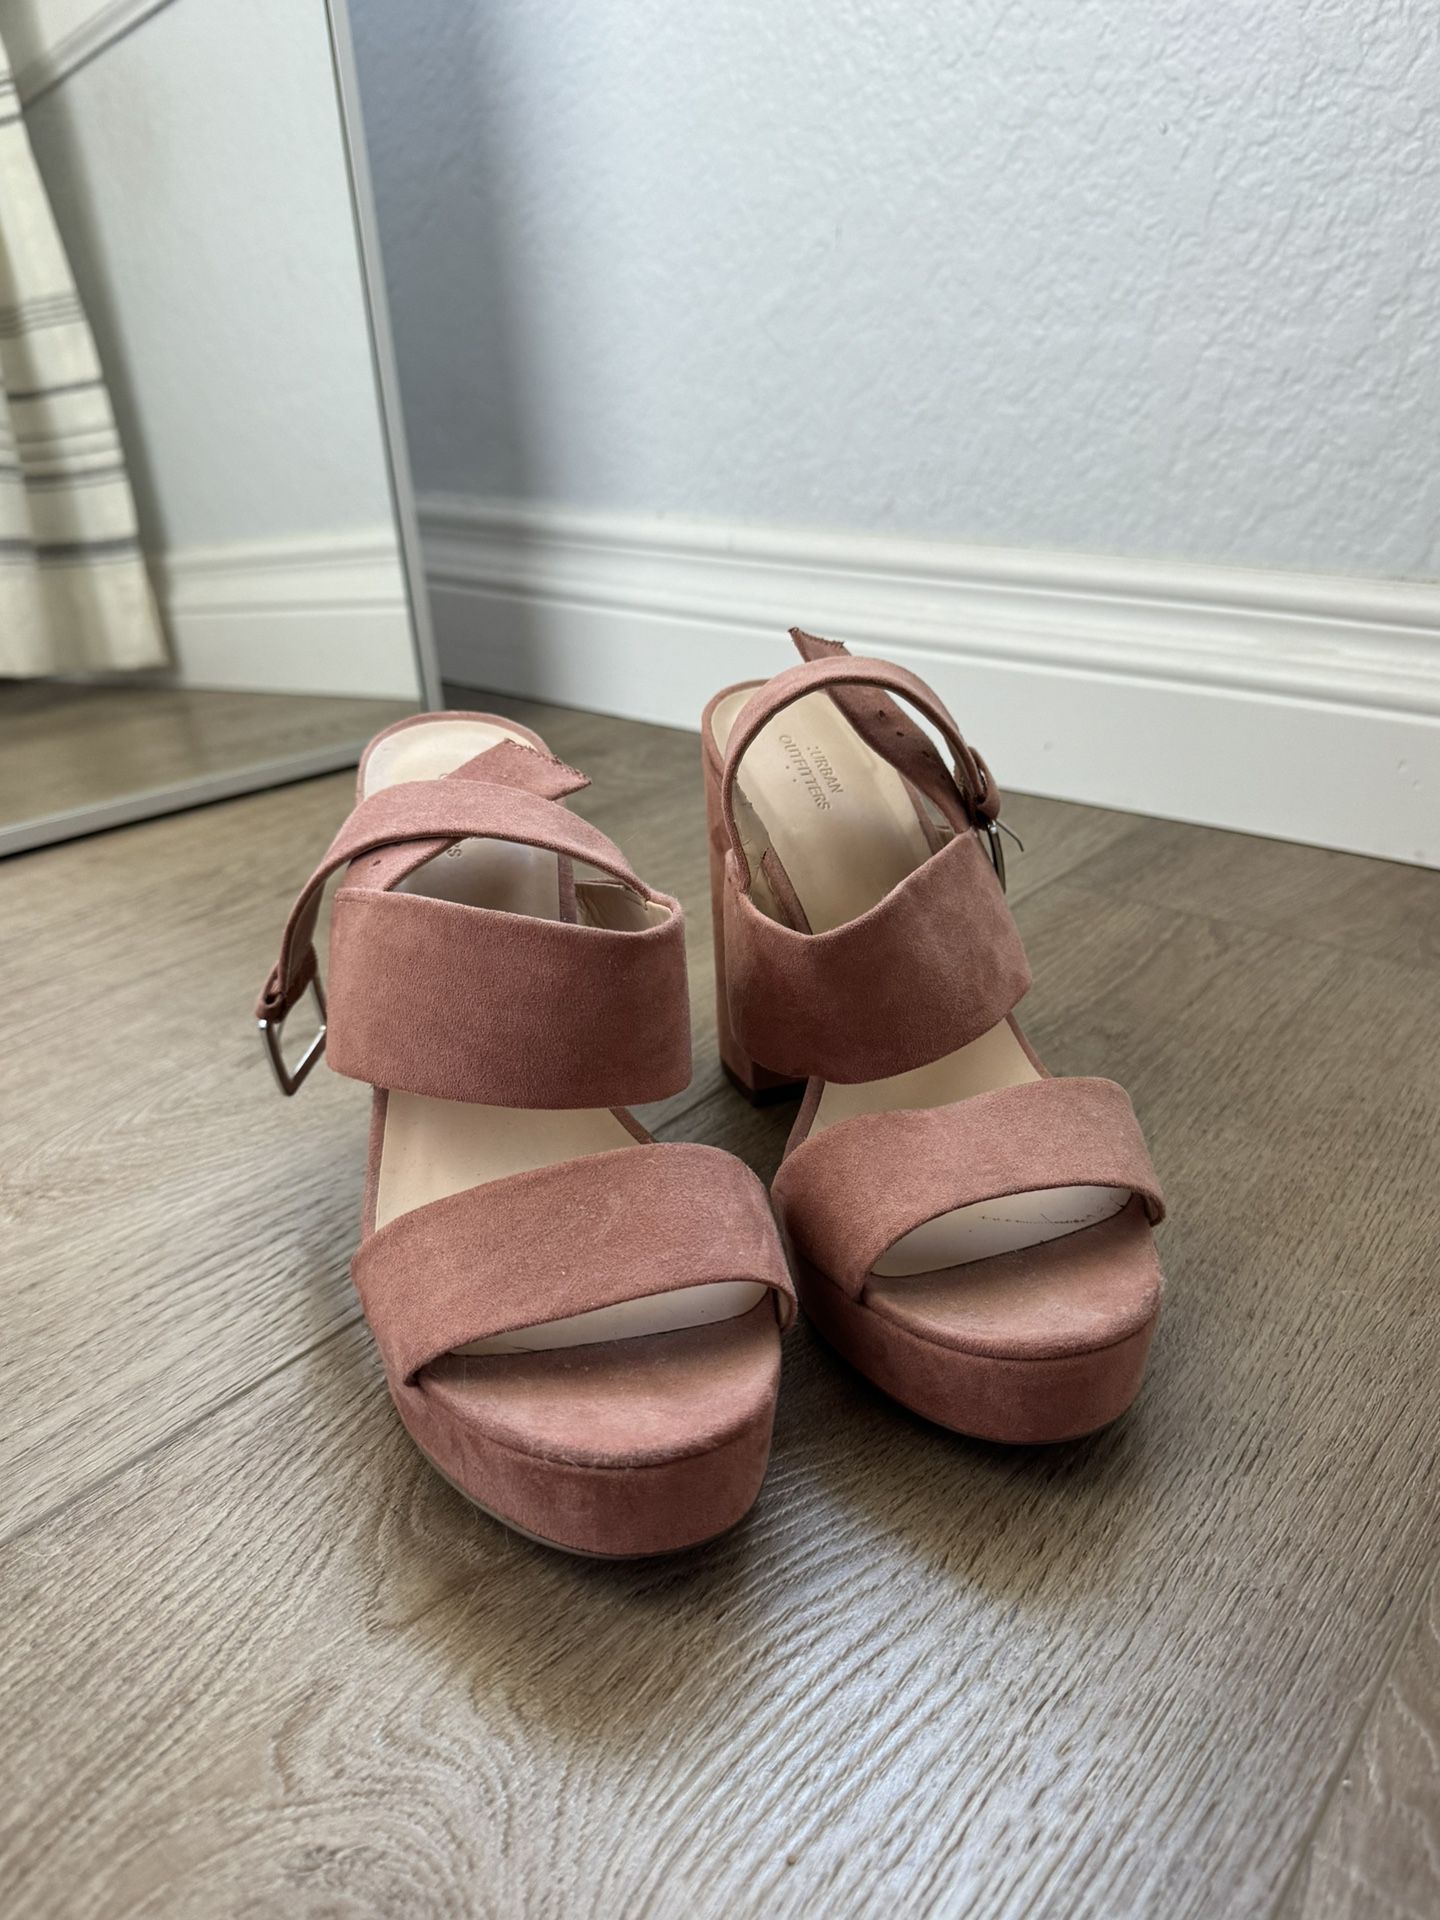 Urban outfitters Dusty rose pink wedge heels